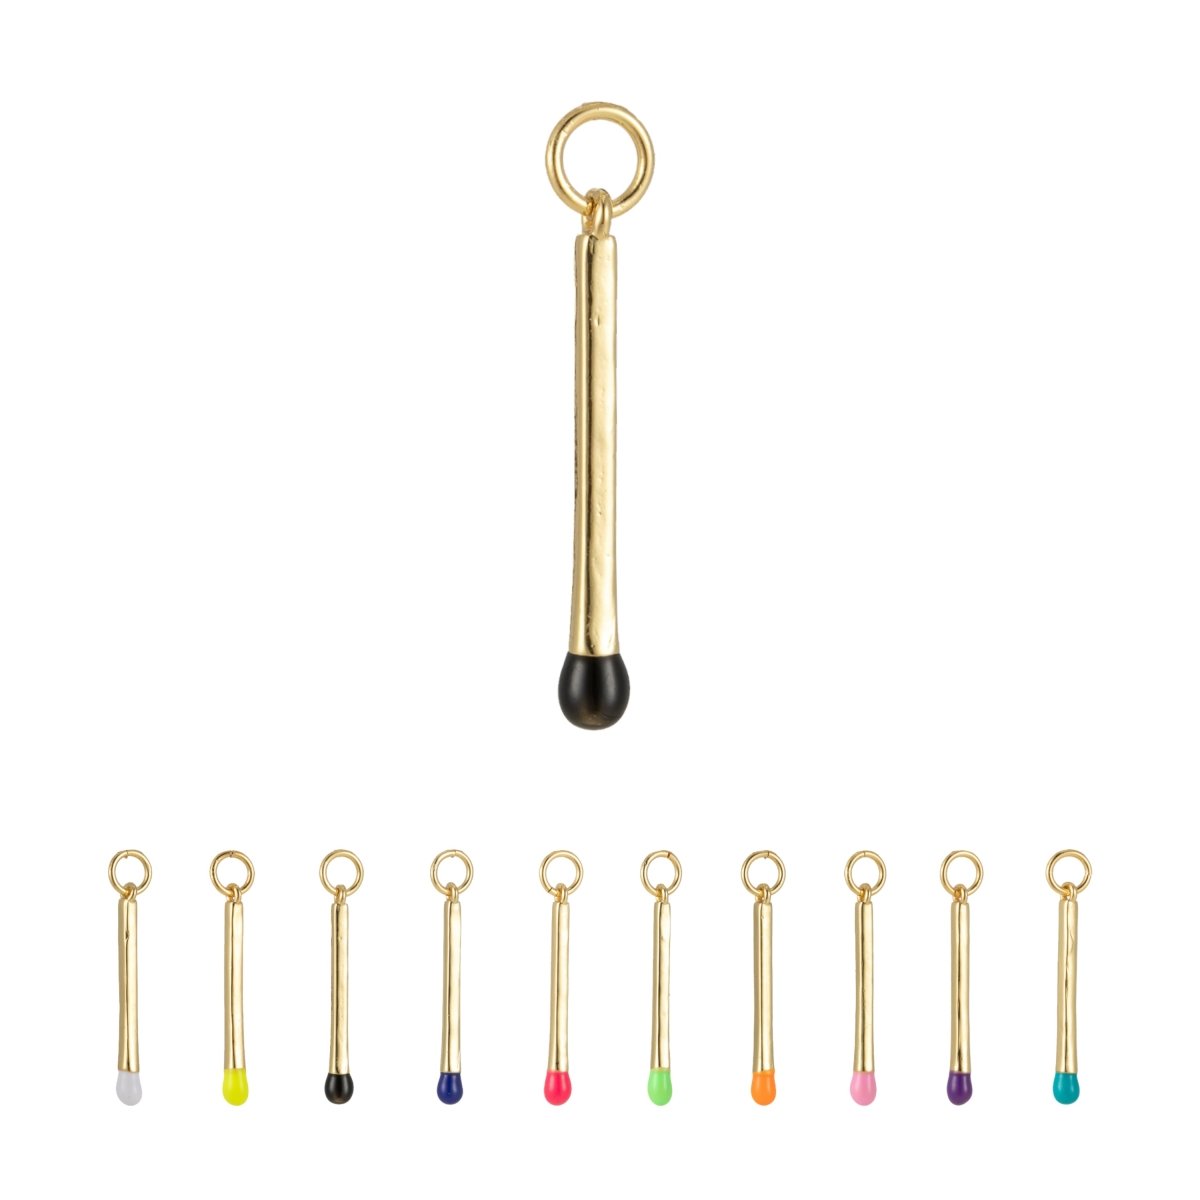 Matchstick Charm Enamel Colored Tip Matches Pendant for Earring Necklace Making Supply Rainbow Black Blue Pink Green Purple Stick Charm E-804-E-813 - DLUXCA